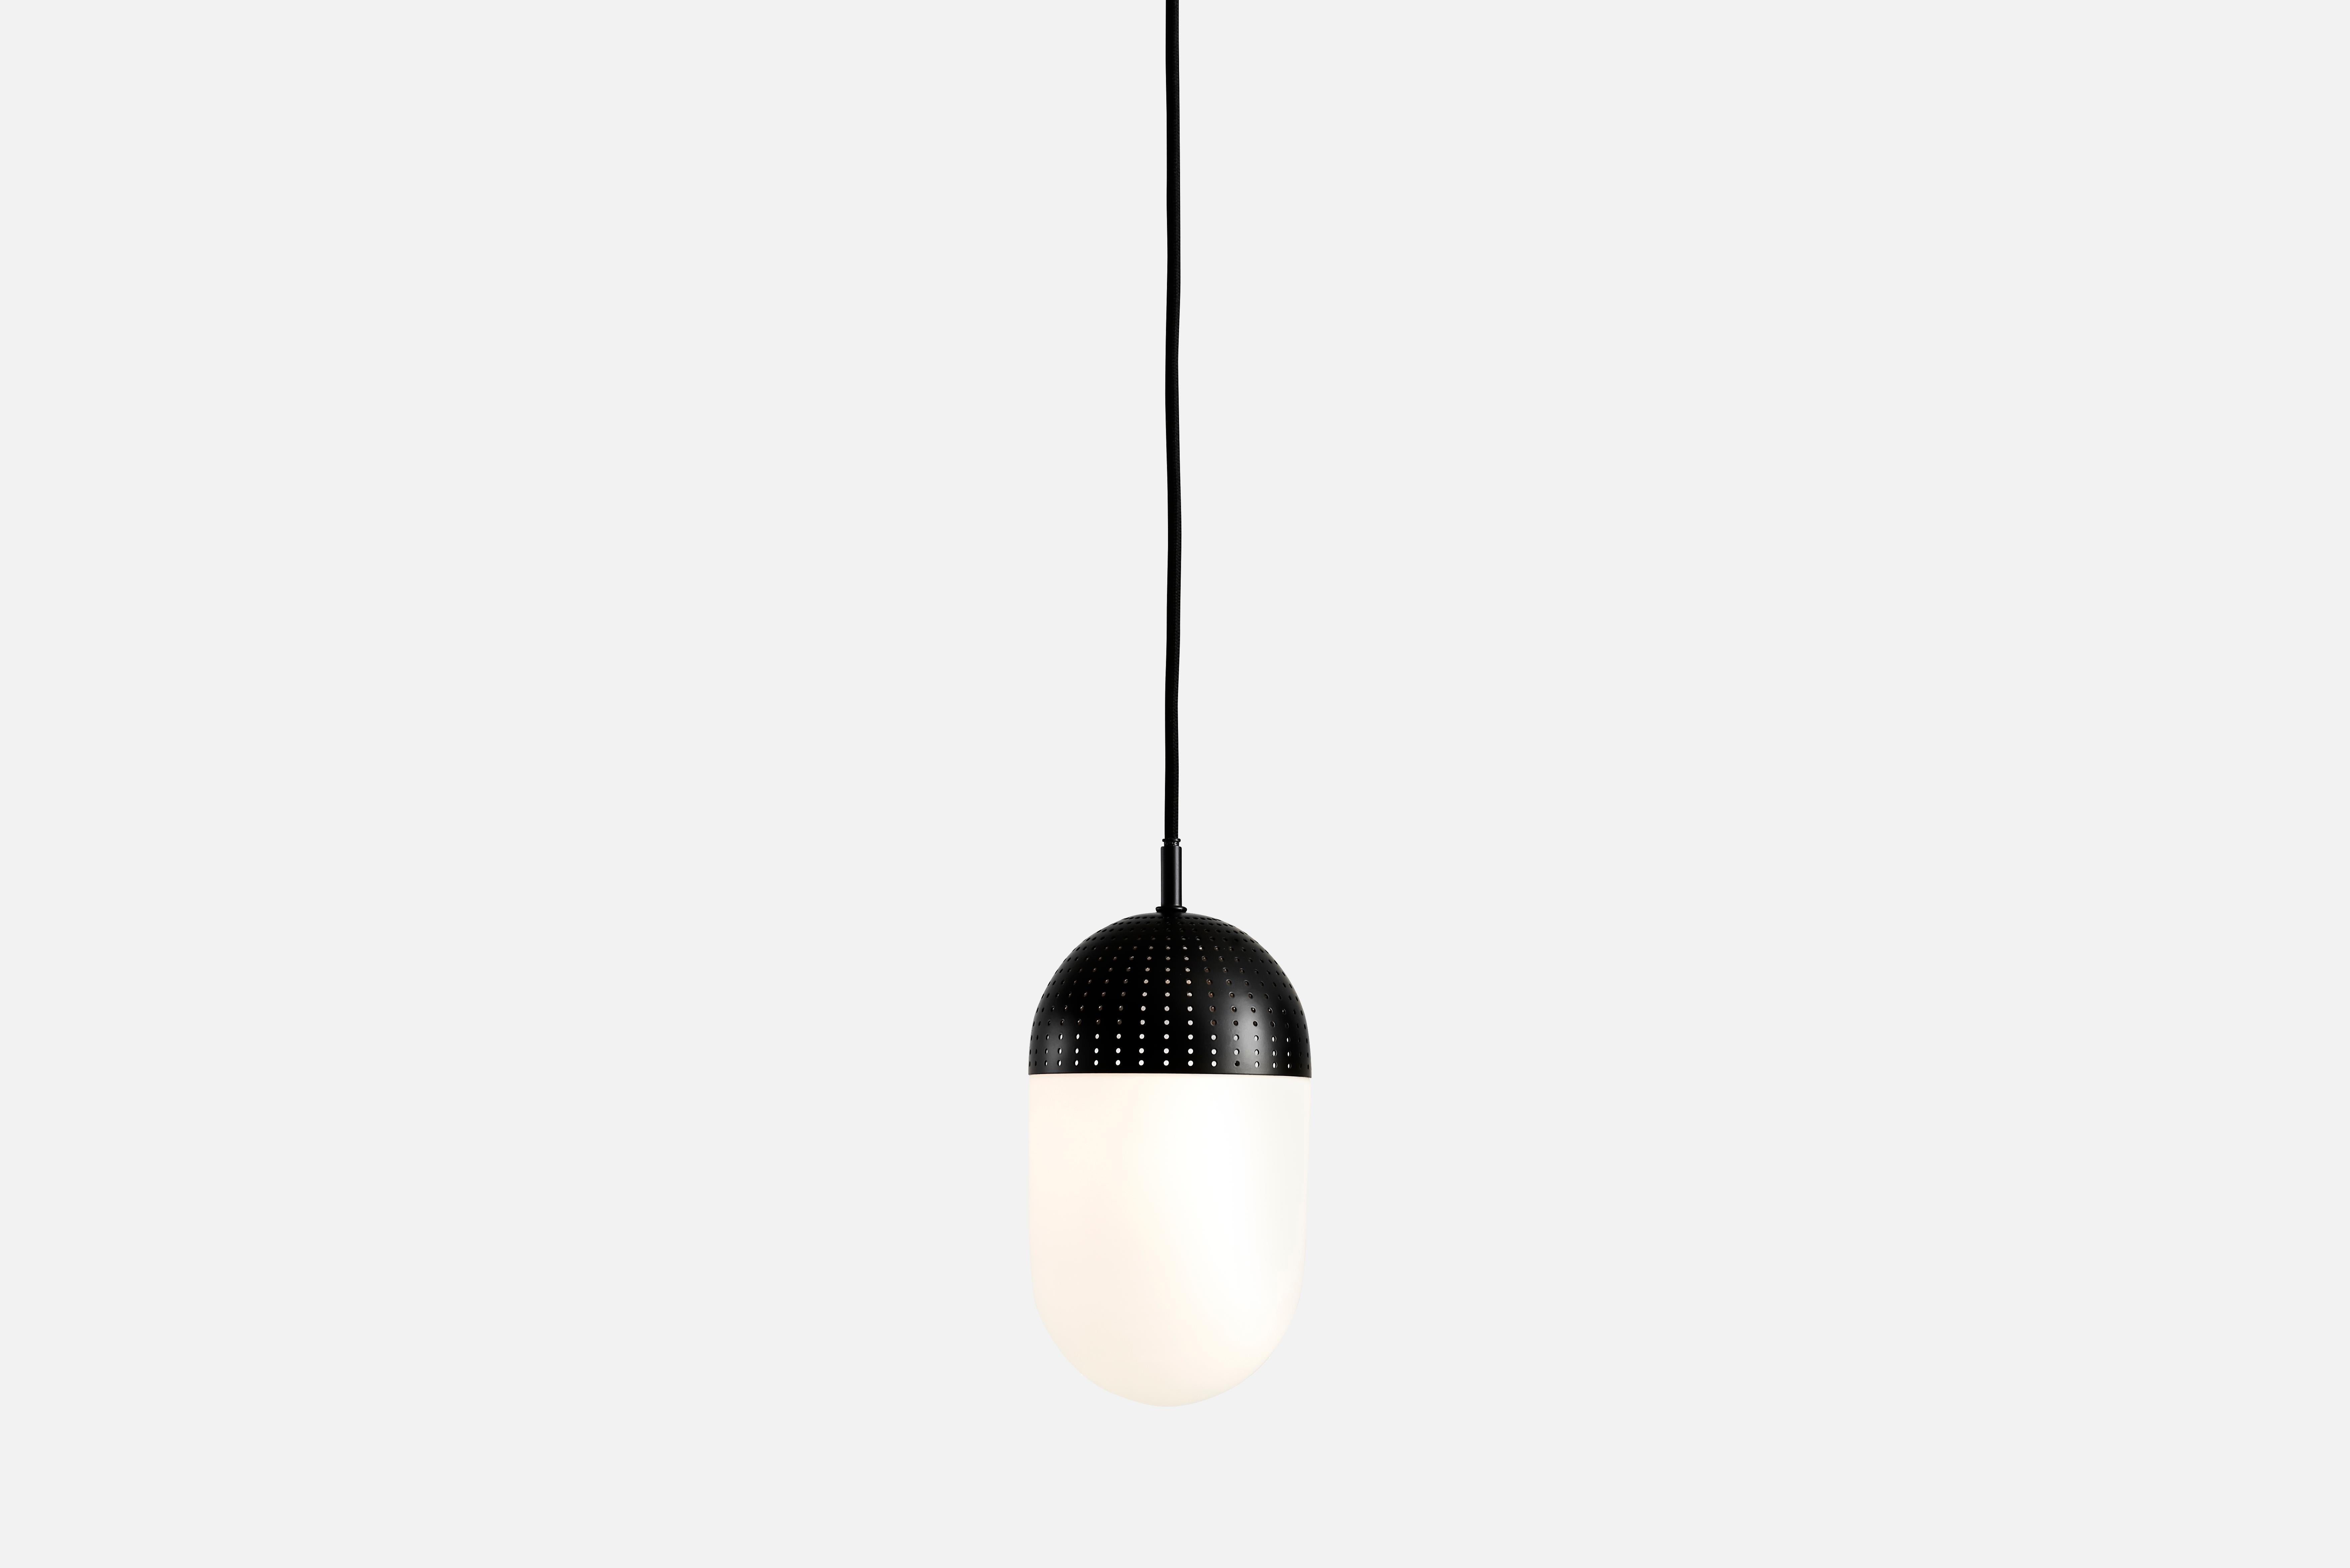 Large black dot pendant lamp by Rikke Frost
Materials: Metal, glass.
Dimensions: D 14 x H 21 cm
Available in black or satin and in 3 sizes: H 13, H 16.6, H 21 cm.

Rikke Frost is a Danish graduate from the School of Architecture Aarhus. Since